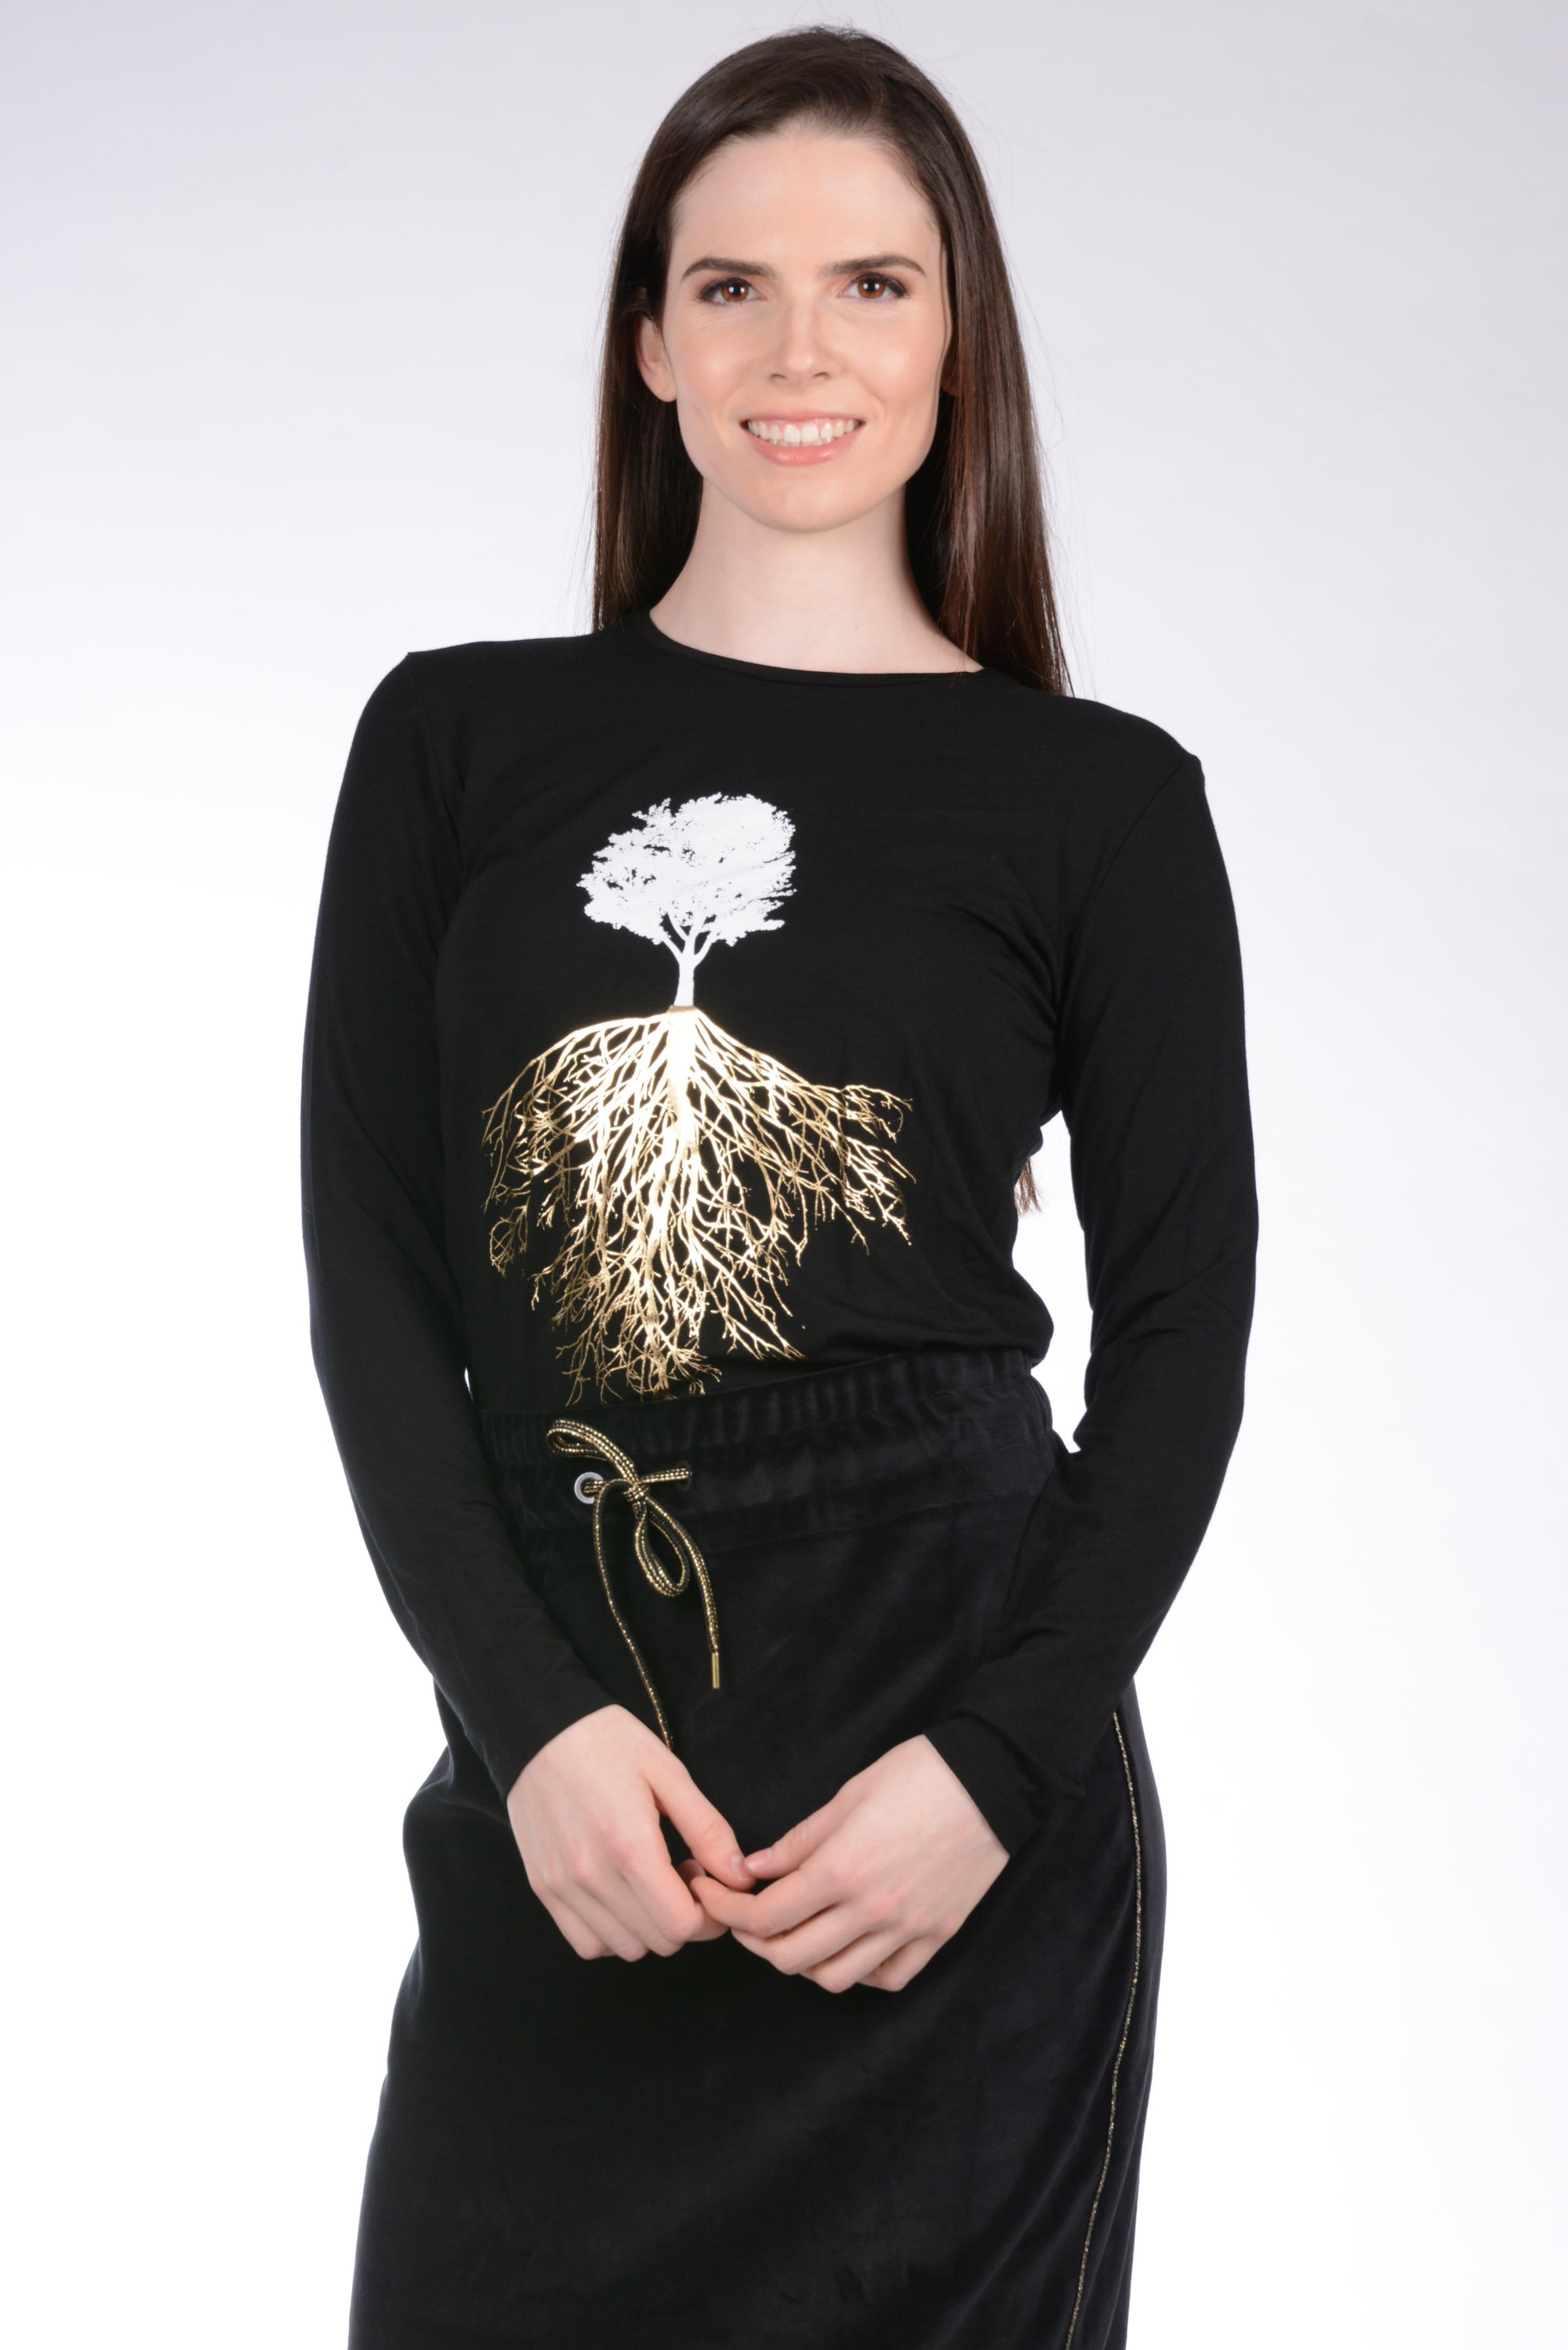 Tree T-Shirt in Black and Gold Foil 3/4 Sleeves